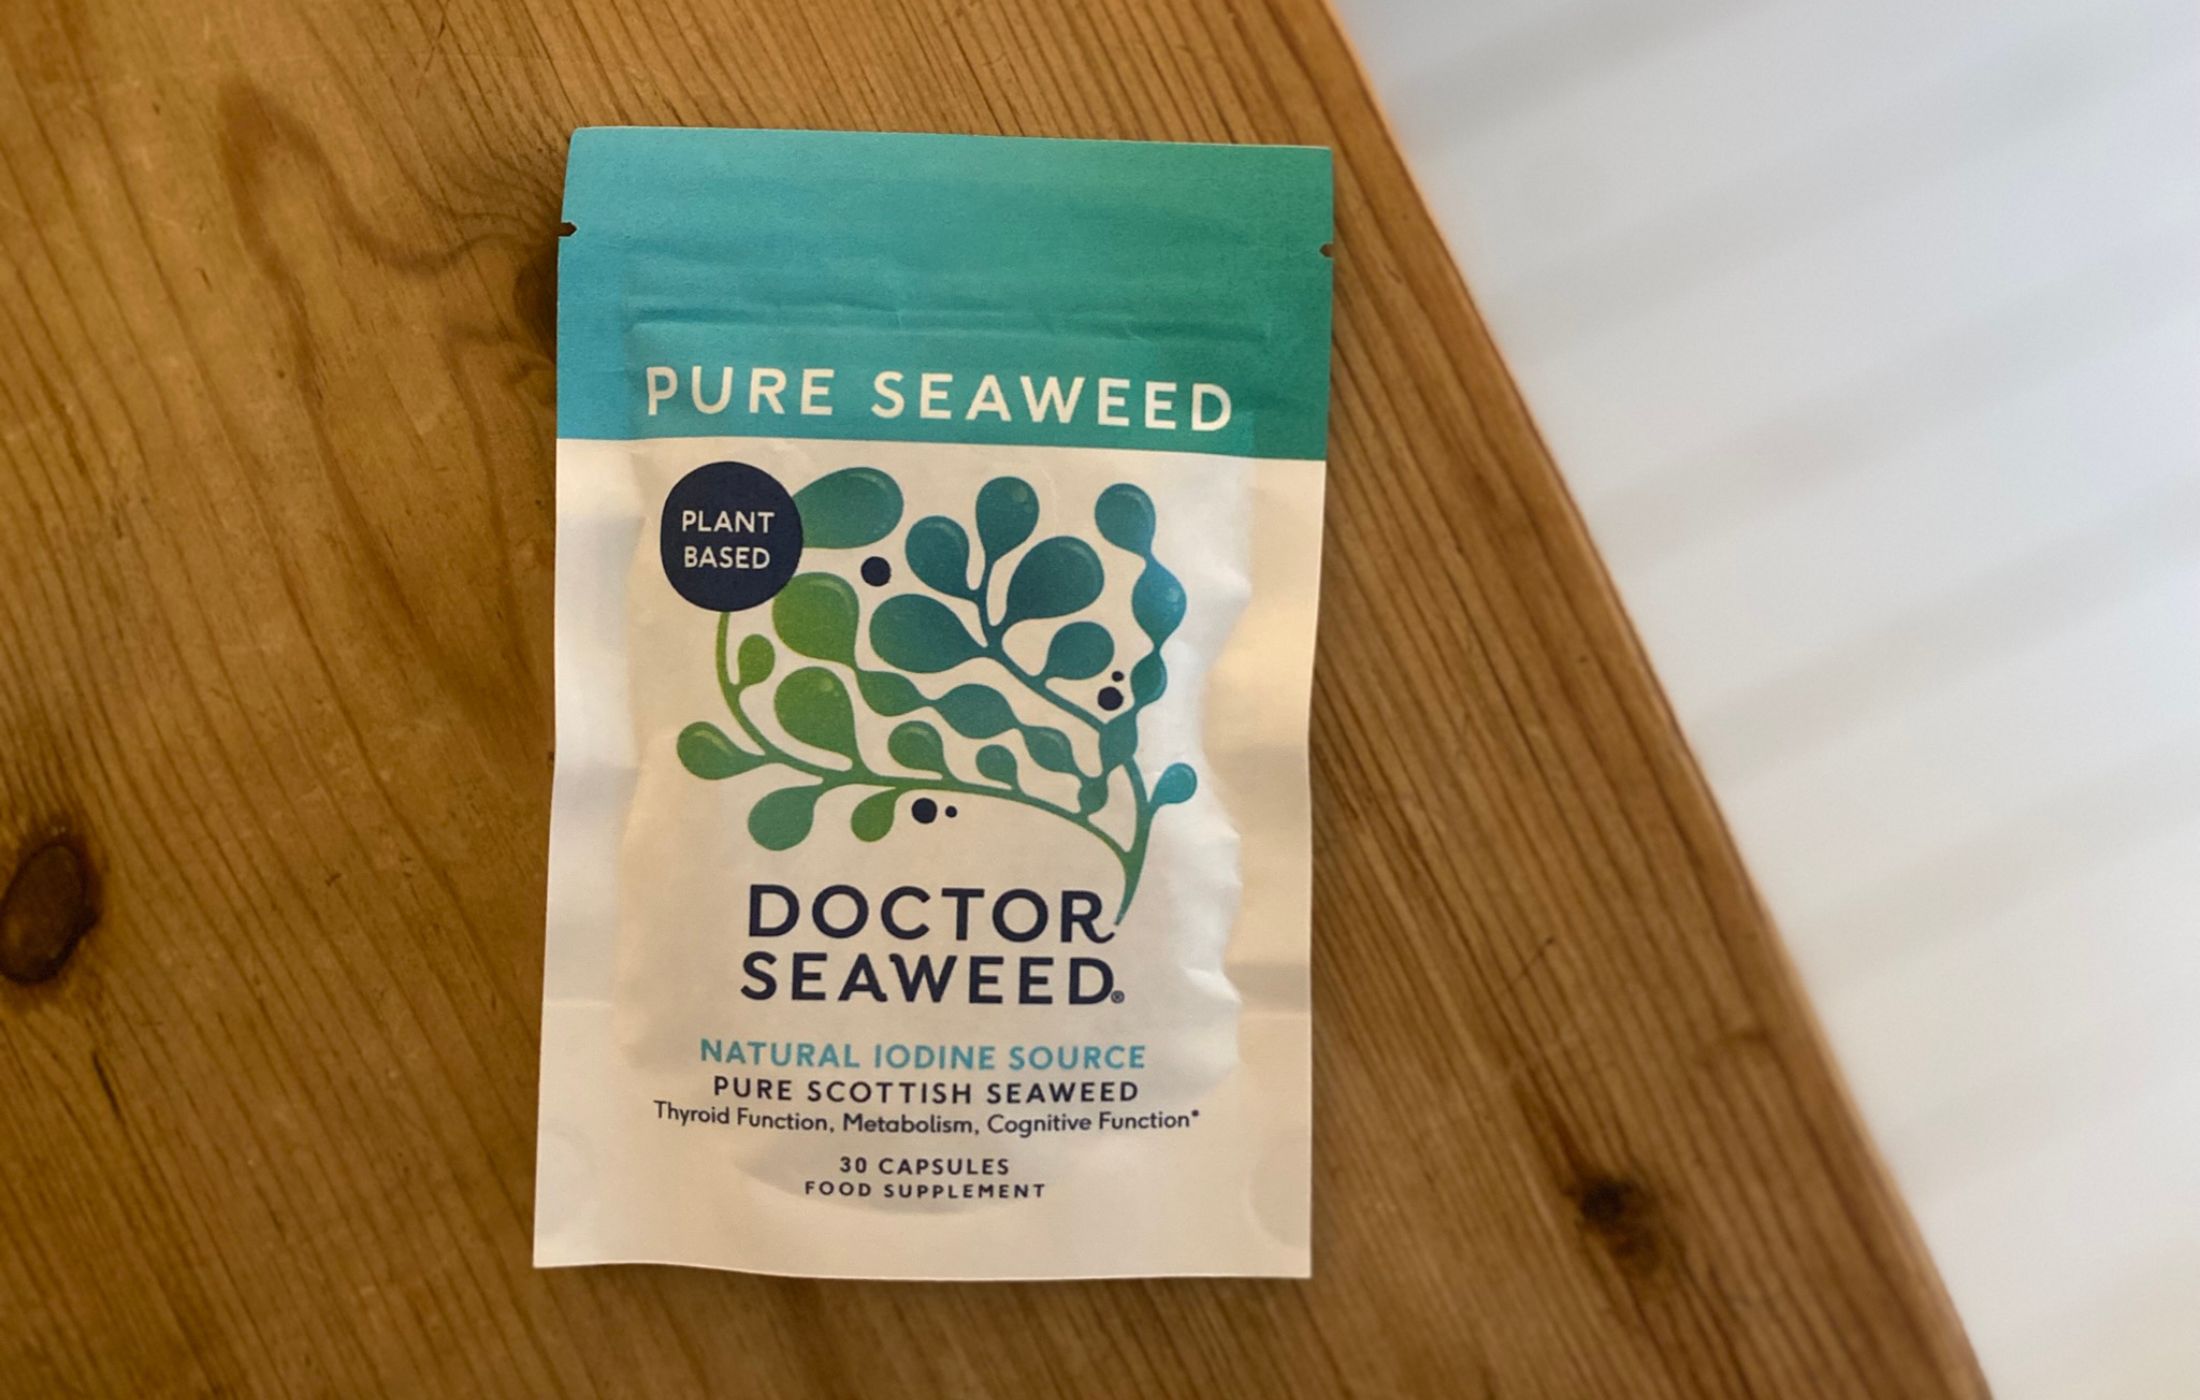 A bag of vegan iodine supplements from Doctor Seaweed